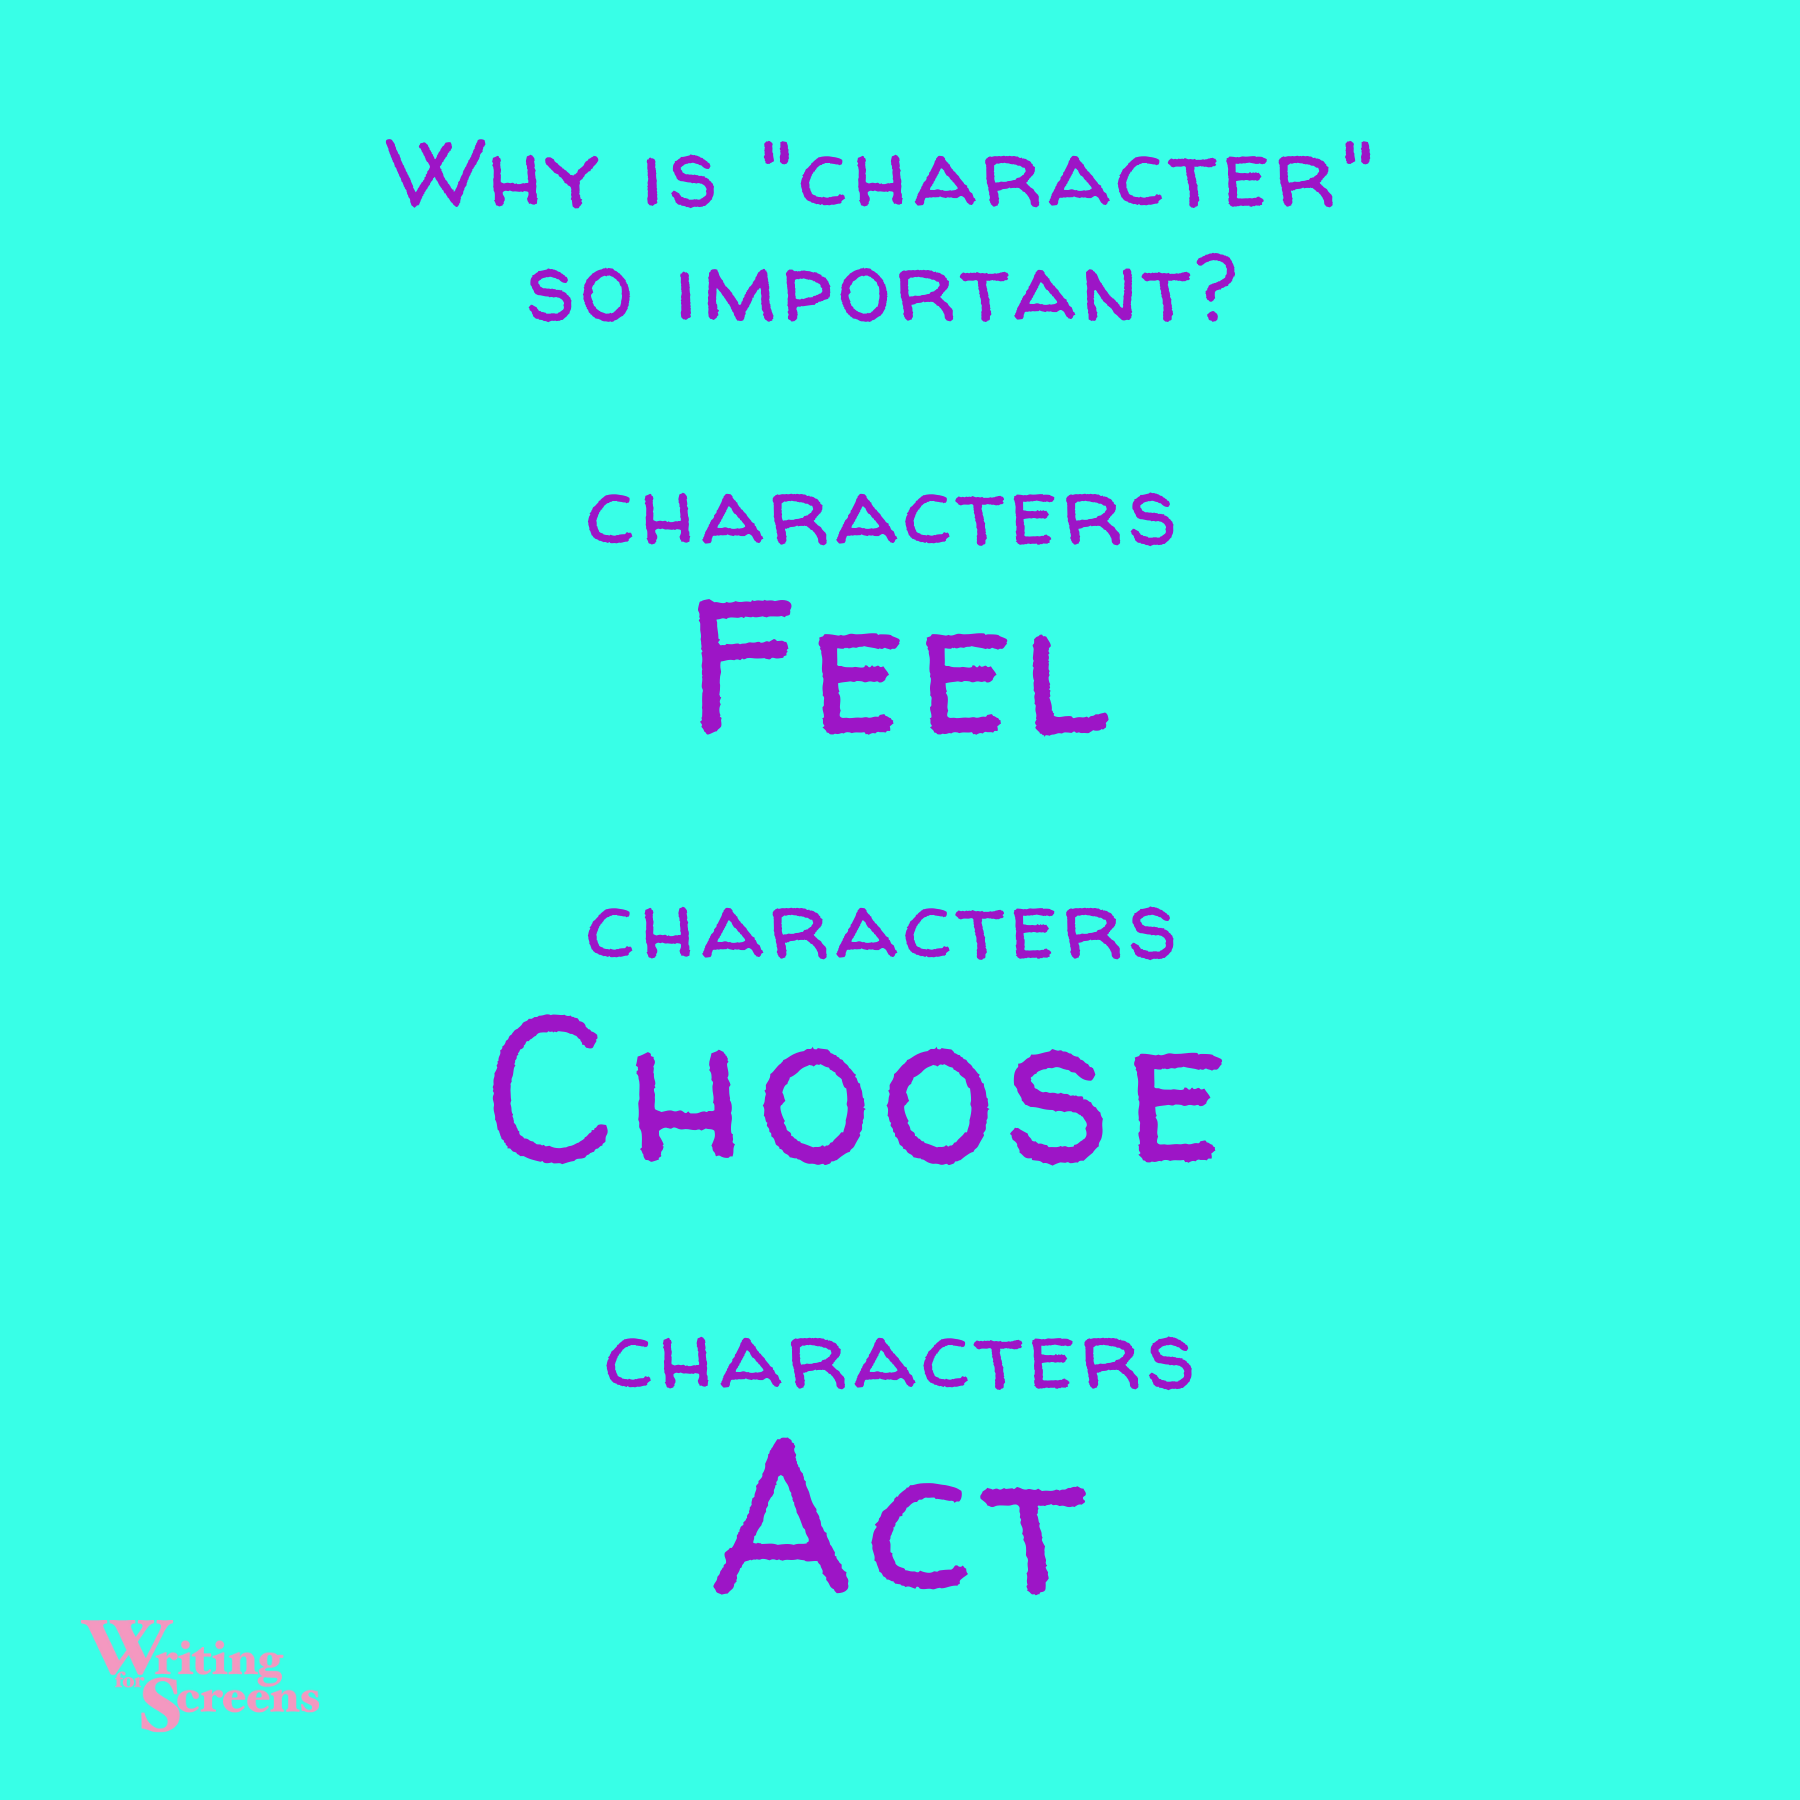 Who Cares About Character?